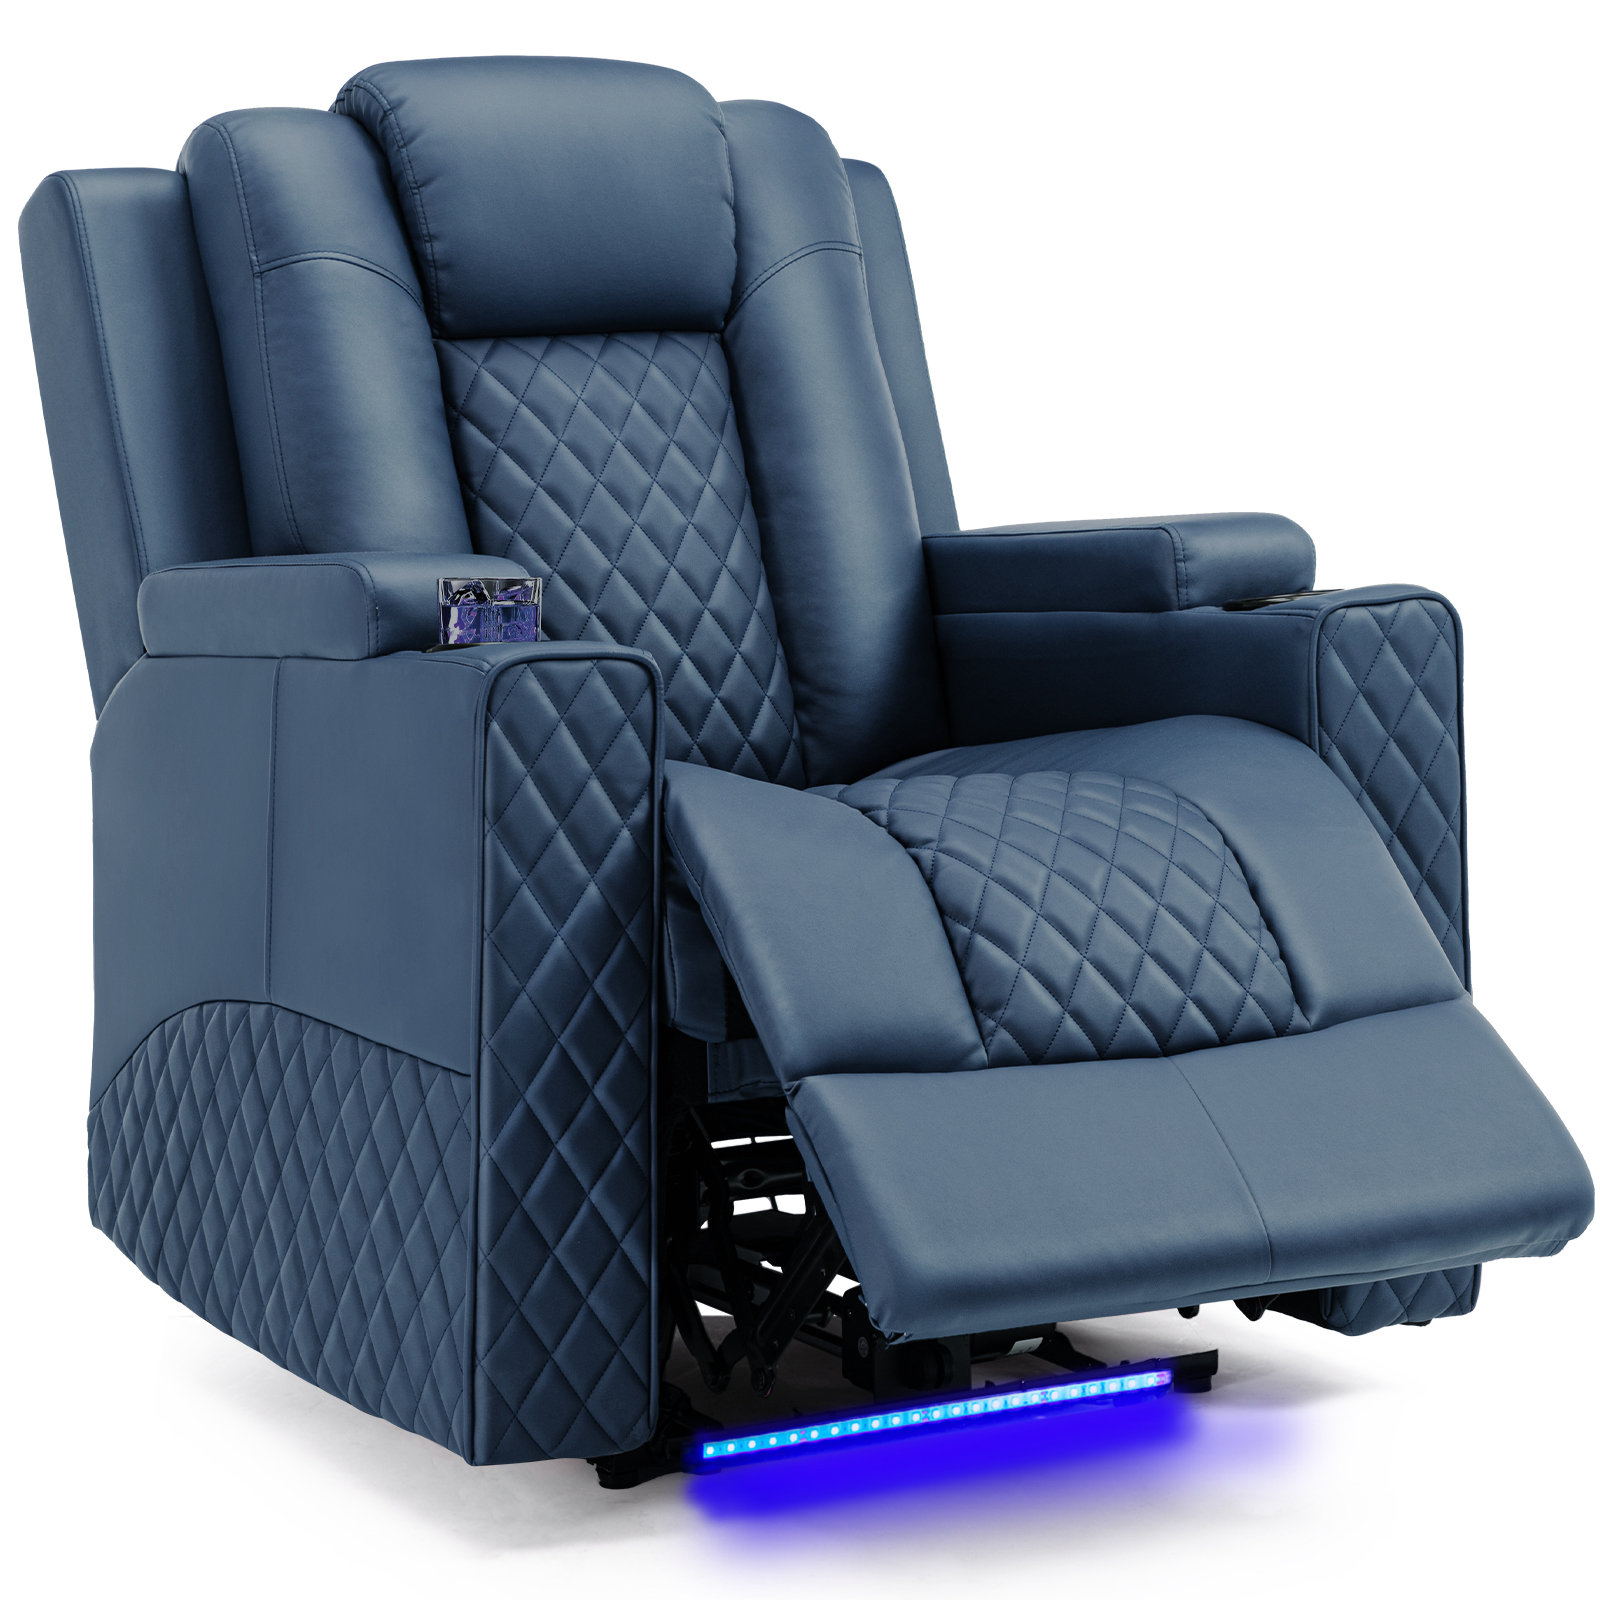 10 Best Recliners for Elderly - Freedom Care